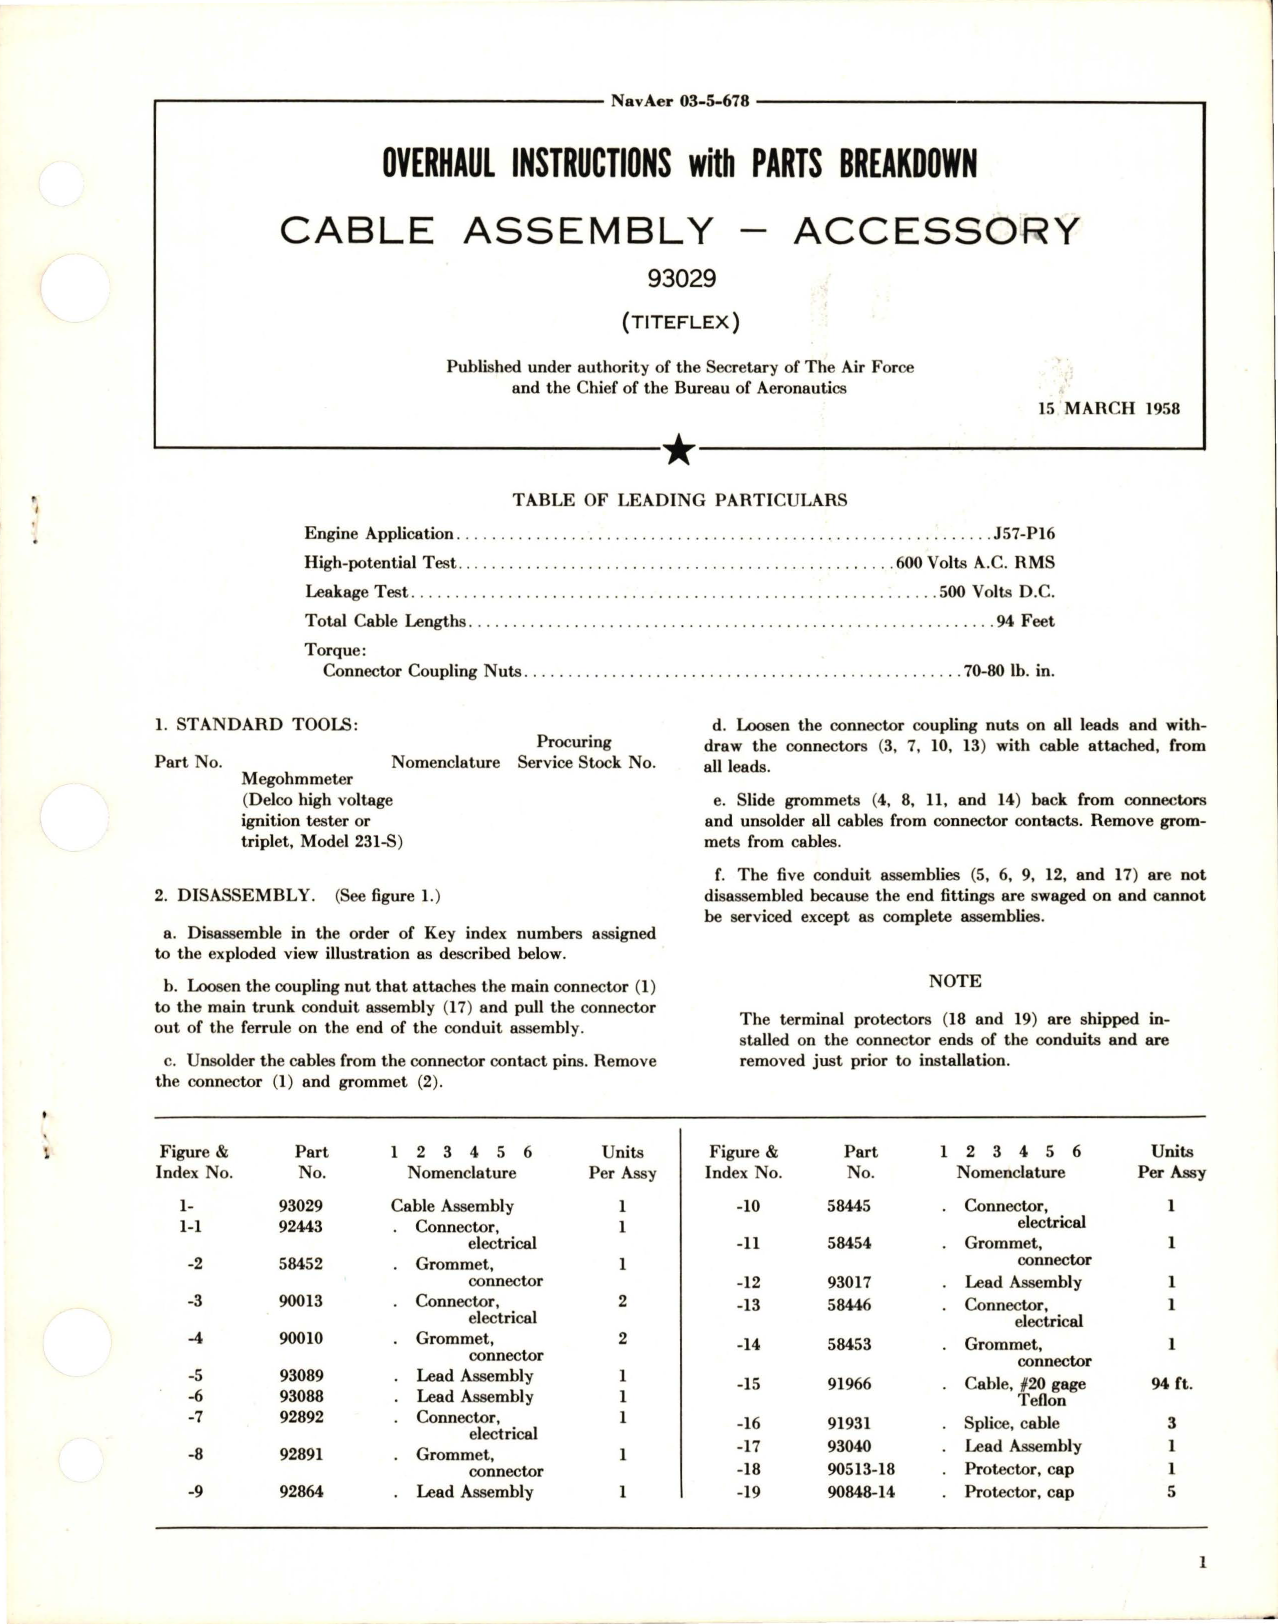 Sample page 1 from AirCorps Library document: Overhaul Instructions with Parts Breakdown for Cable Assembly Accessory - 93029